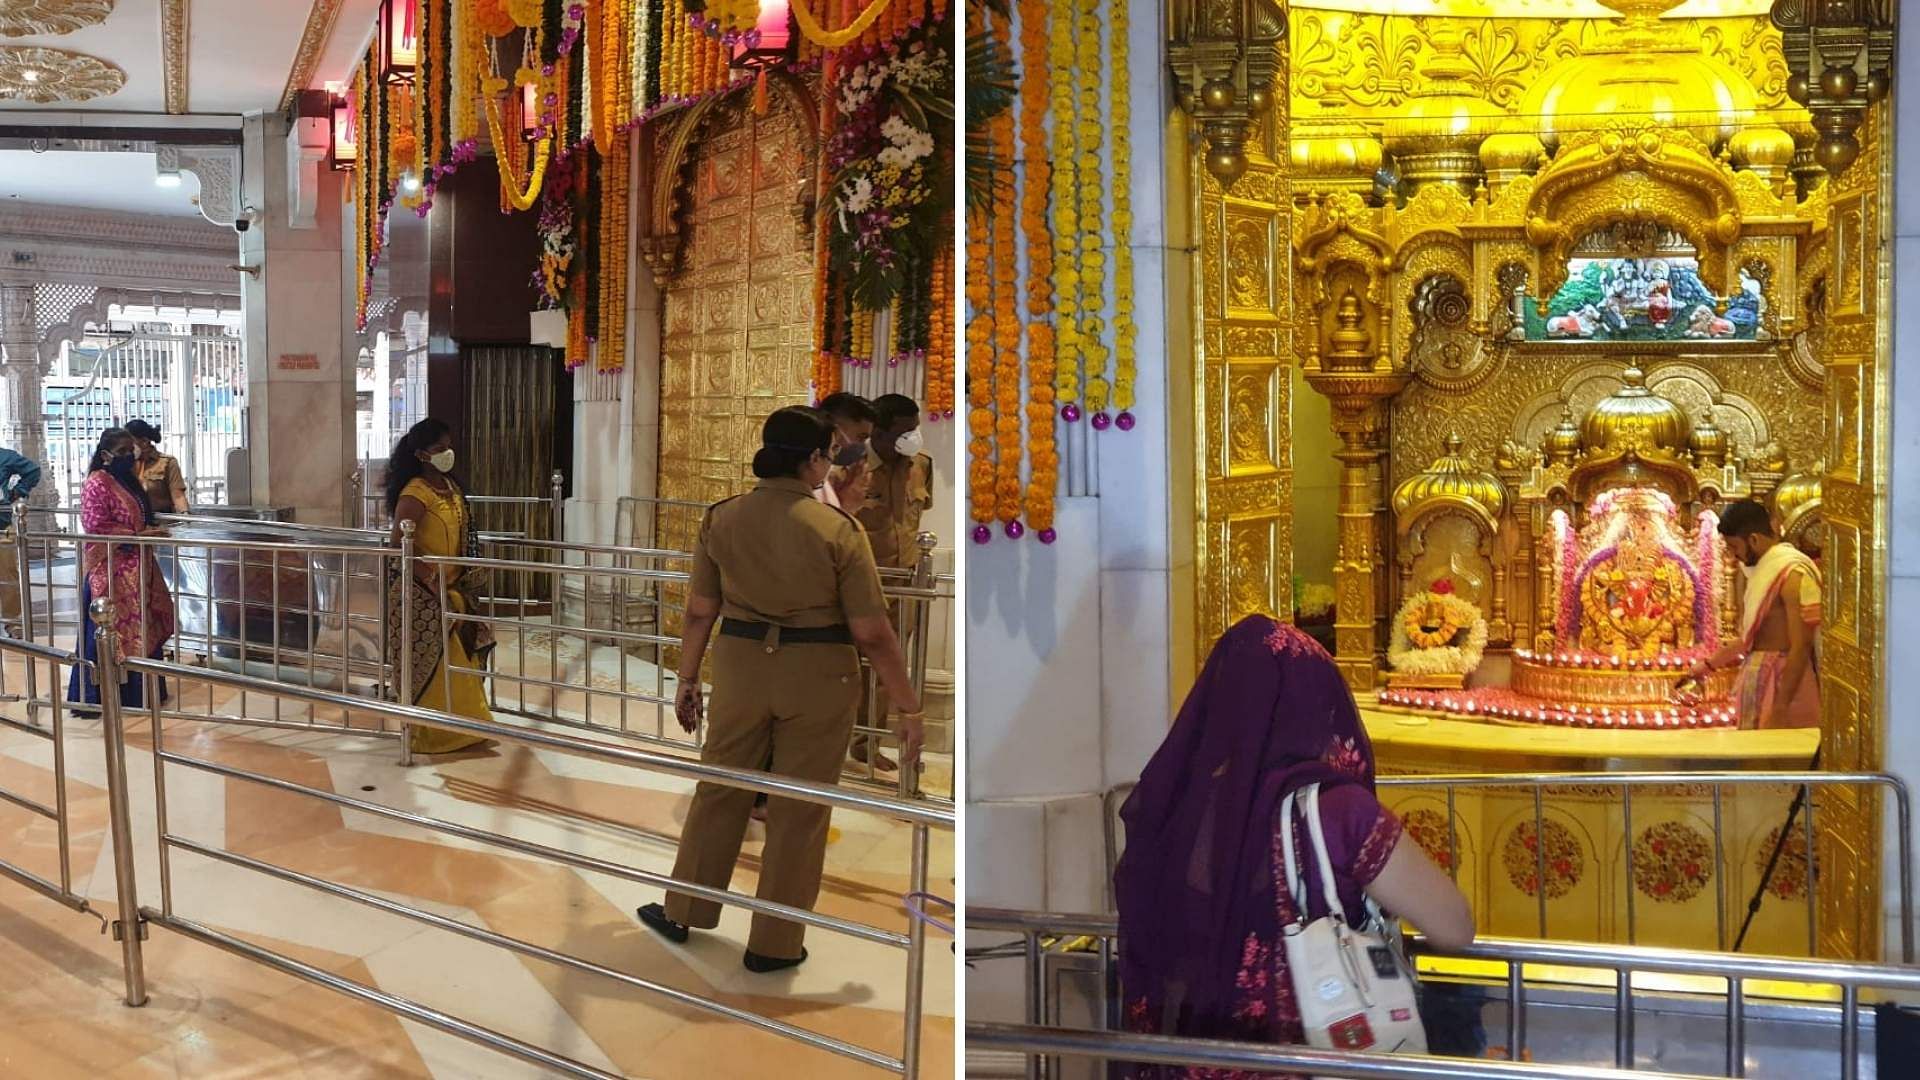 Devotees offer prayers at Mumbai’s Siddhivinayak temple after it reopened on 16 November